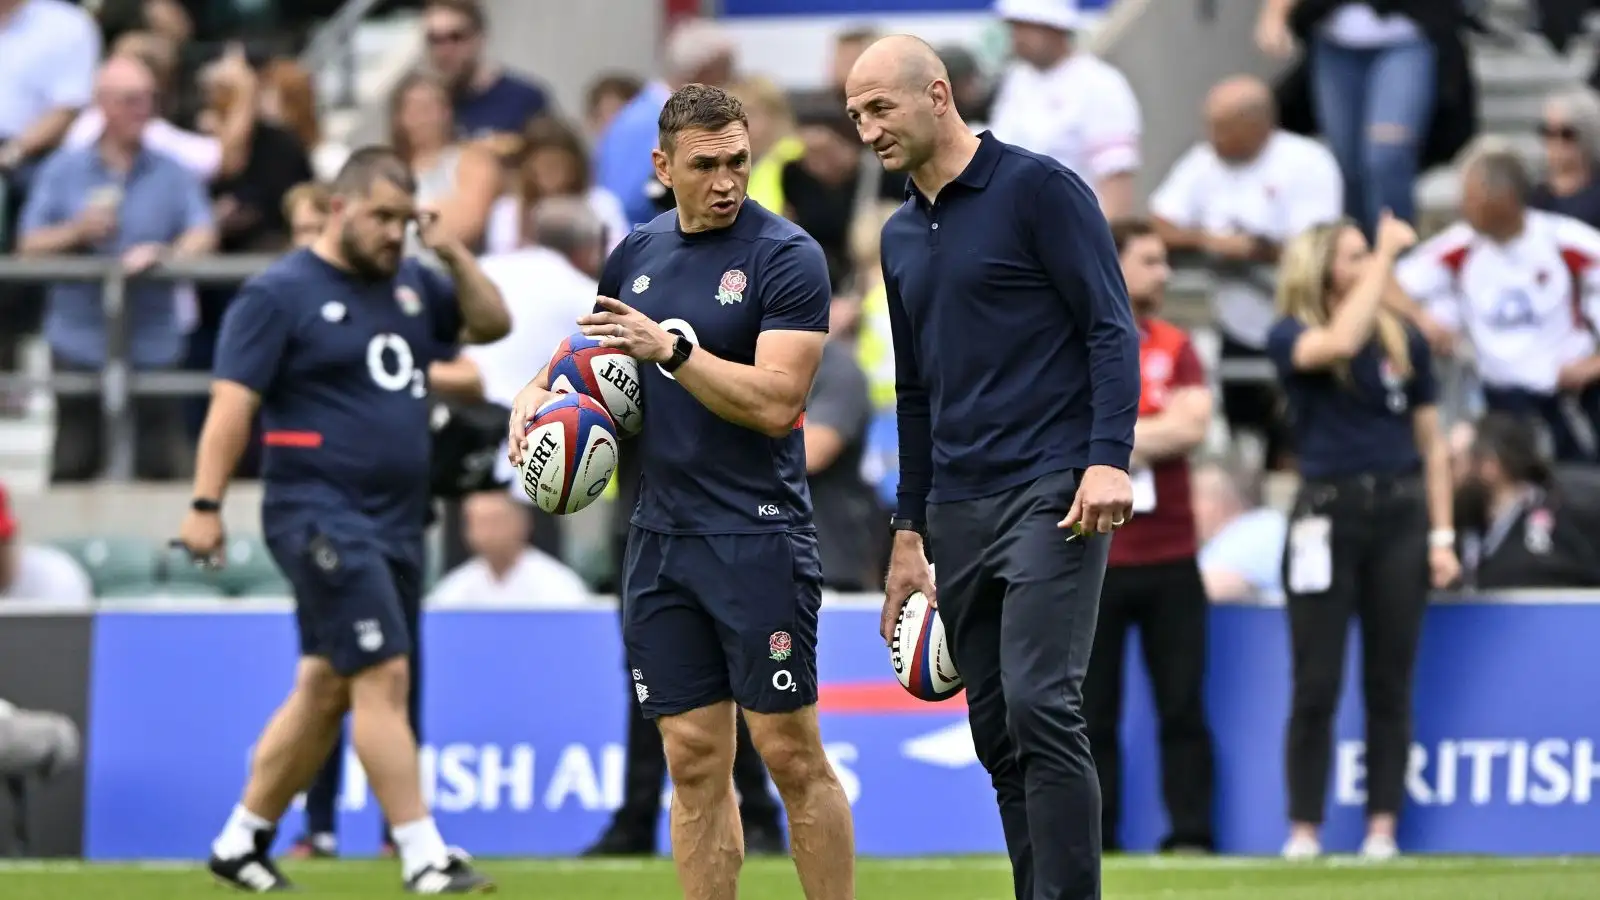 Kevin Sinfield to leave role with England Rugby Union after summer tour following ‘period of reflection’